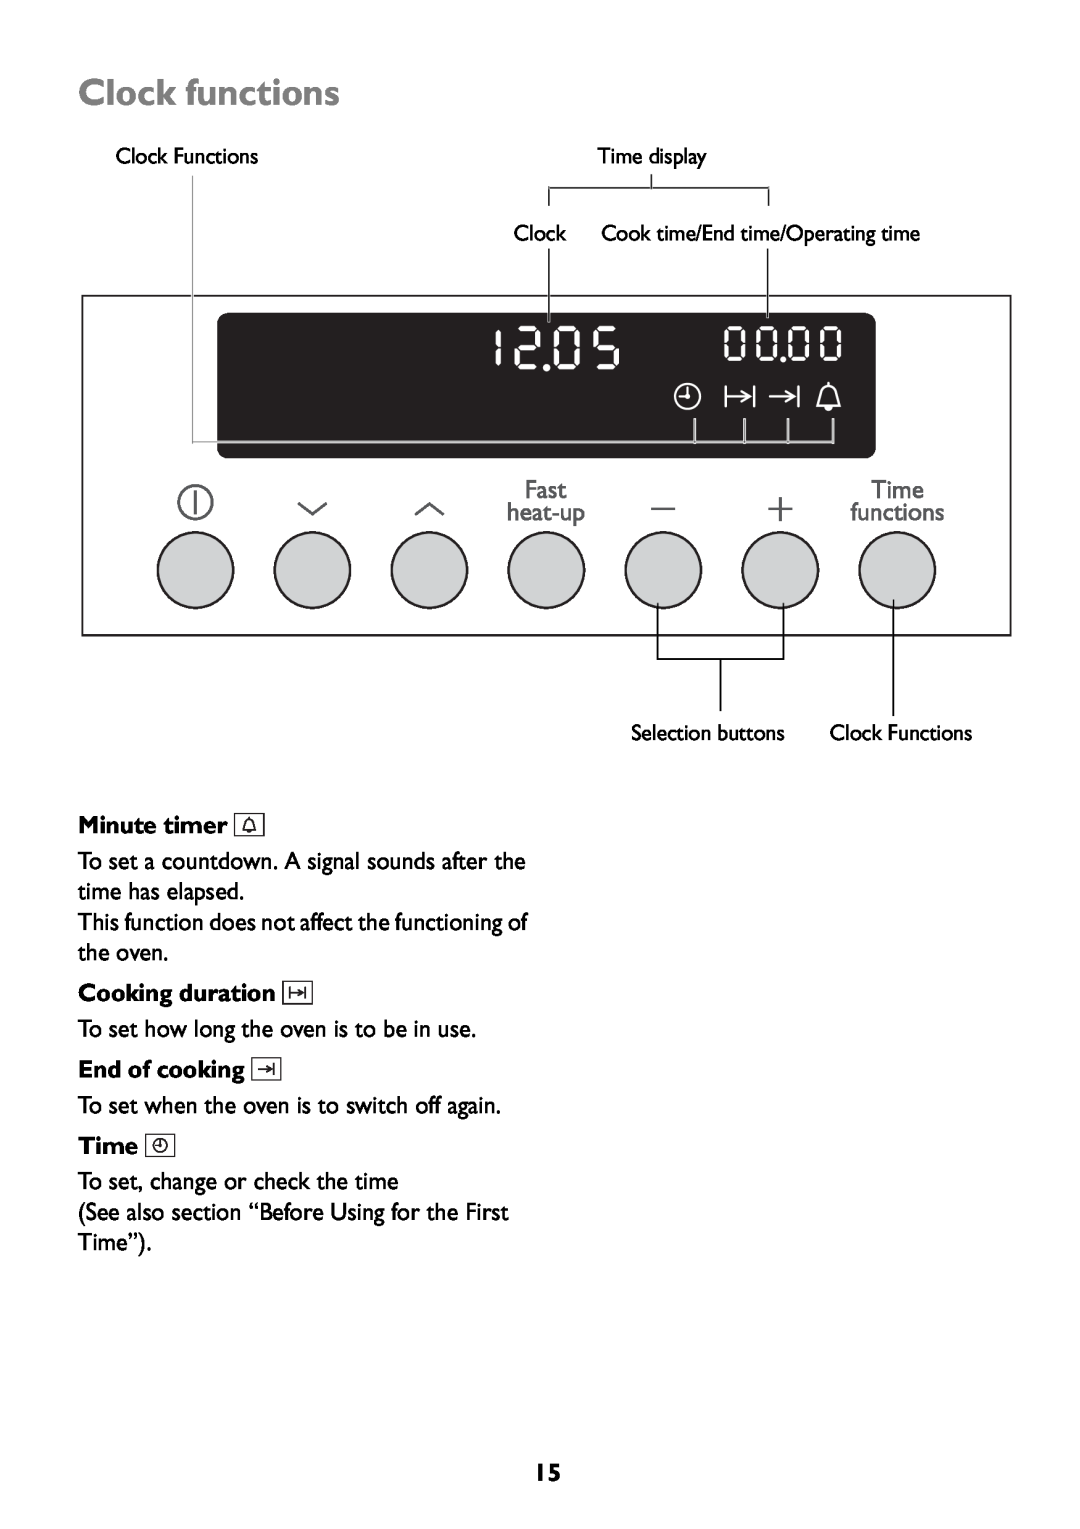 John Lewis JLBIOS609 manual Clock functions, Minute timer, Cooking duration, End of cooking, Time 